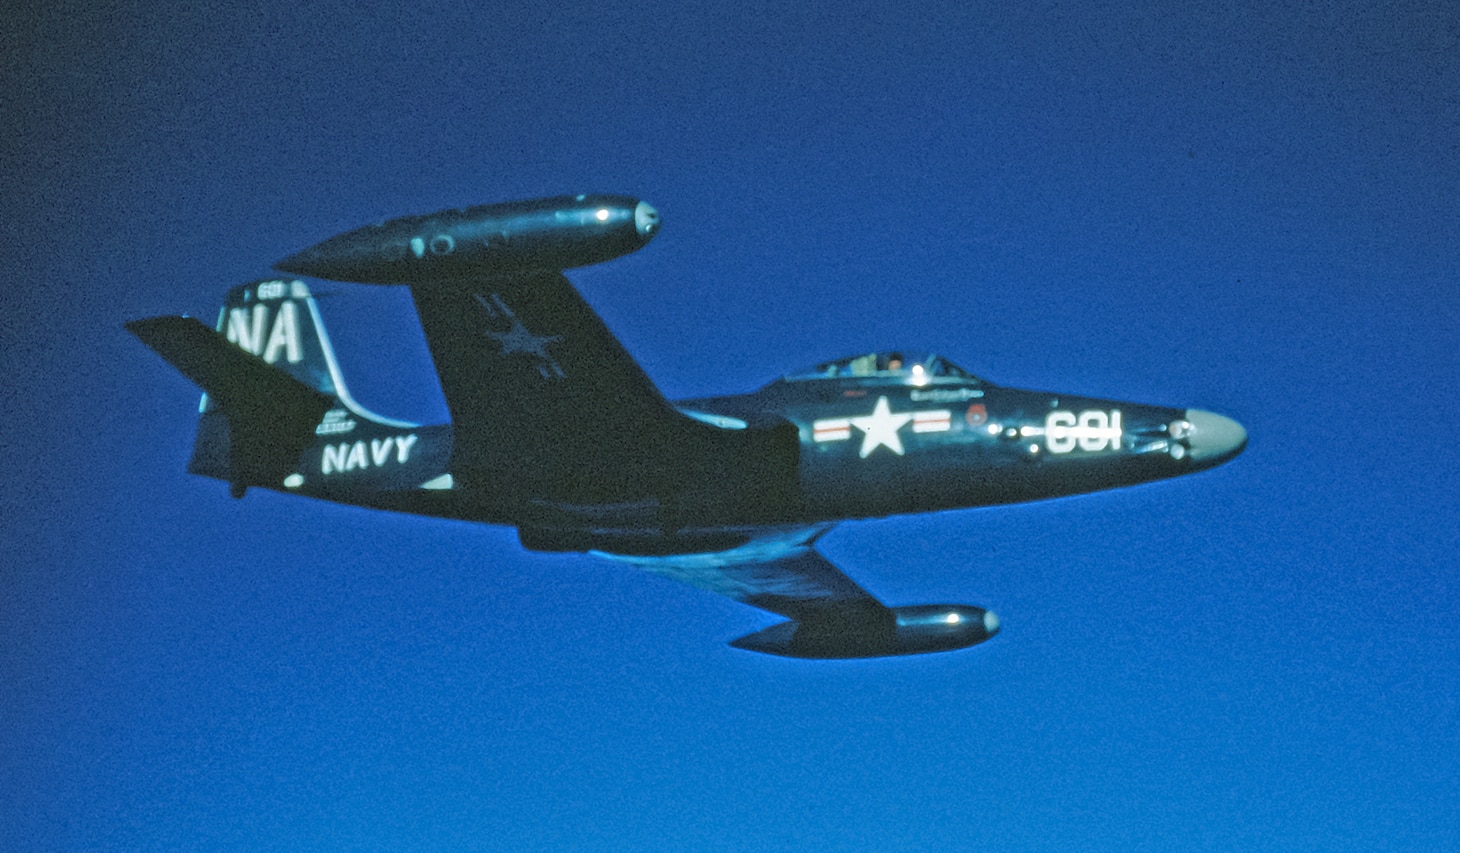 An F2H-2N of Composite Squadron (VC) 4 during a Mediterranean deployment in the early 1950s. This model of the Banshee saw limited service before the introduction of the more capable F4D Skyray and F3H Demon.